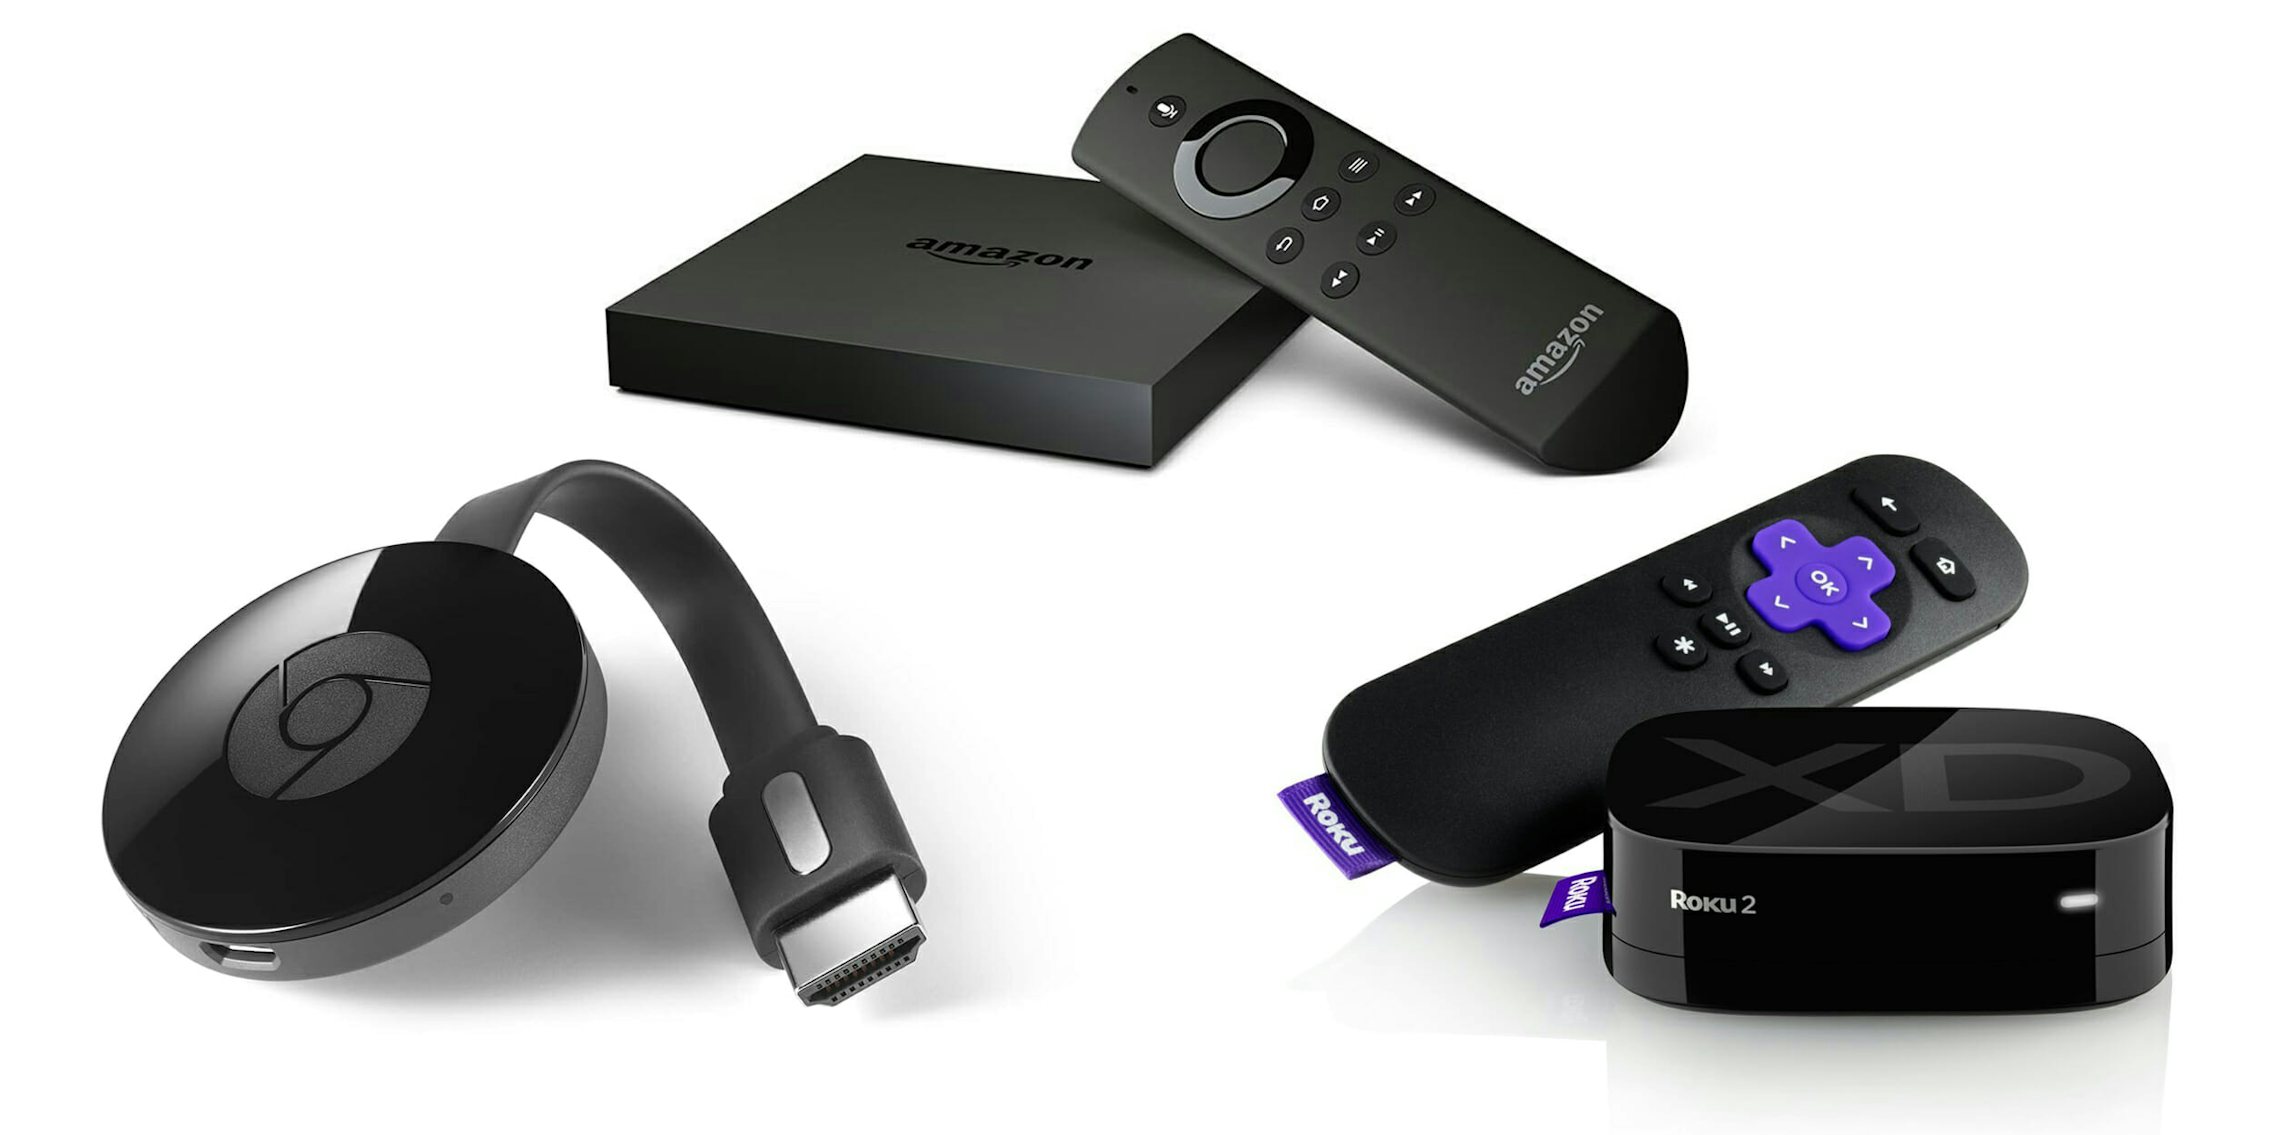 Chromecast vs Fire TV Stick, which is better?